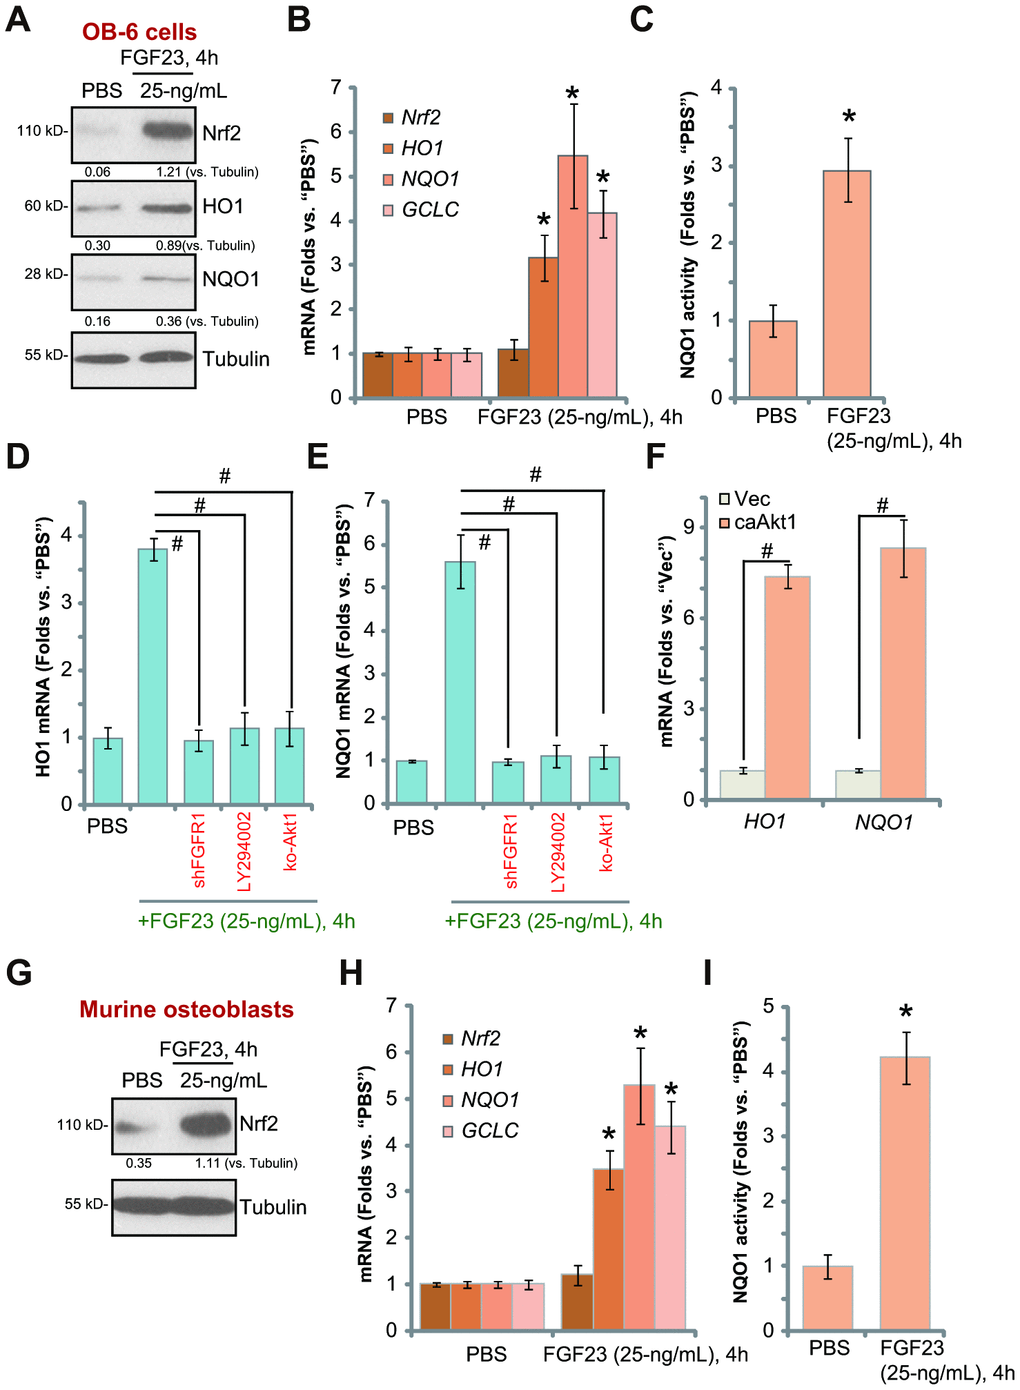 FGF23 activates Nrf2 signaling in osteoblasts. OB-6 osteoblastic cells (A–C) or the primary murine osteoblasts (G–I) were treated with FGF23 (25 ng/mL) for 4h, expression of listed genes in total cell lysates was tested by Western blotting and qPCR assays (A, B, G and H), with relative NQO1 activity tested as well (C and I). The control OB-6 cells, pre-treated with LY294002 (500 nM, 30 min pretreatment), as well as the stable OB-6 cells with the lentiviral FGFR1 shRNA (“shFGFR1”) or the CRISPR/Cas9-Akt1-KO construct (“ko-Akt1”), were treated with FGF23 (25 ng/mL) for 4h, expression of HO1 and NQO1 mRNA was shown (D and E). The relative HO1 and NQO1 mRNA expression in stable OB-6 cells with the constitutively-active Akt1 construct (caAkt1) or the empty vector (“Vec”) was tested (F). Data are presented as the mean ± standard deviation (n=5).* pvs. PBS treatment. # p